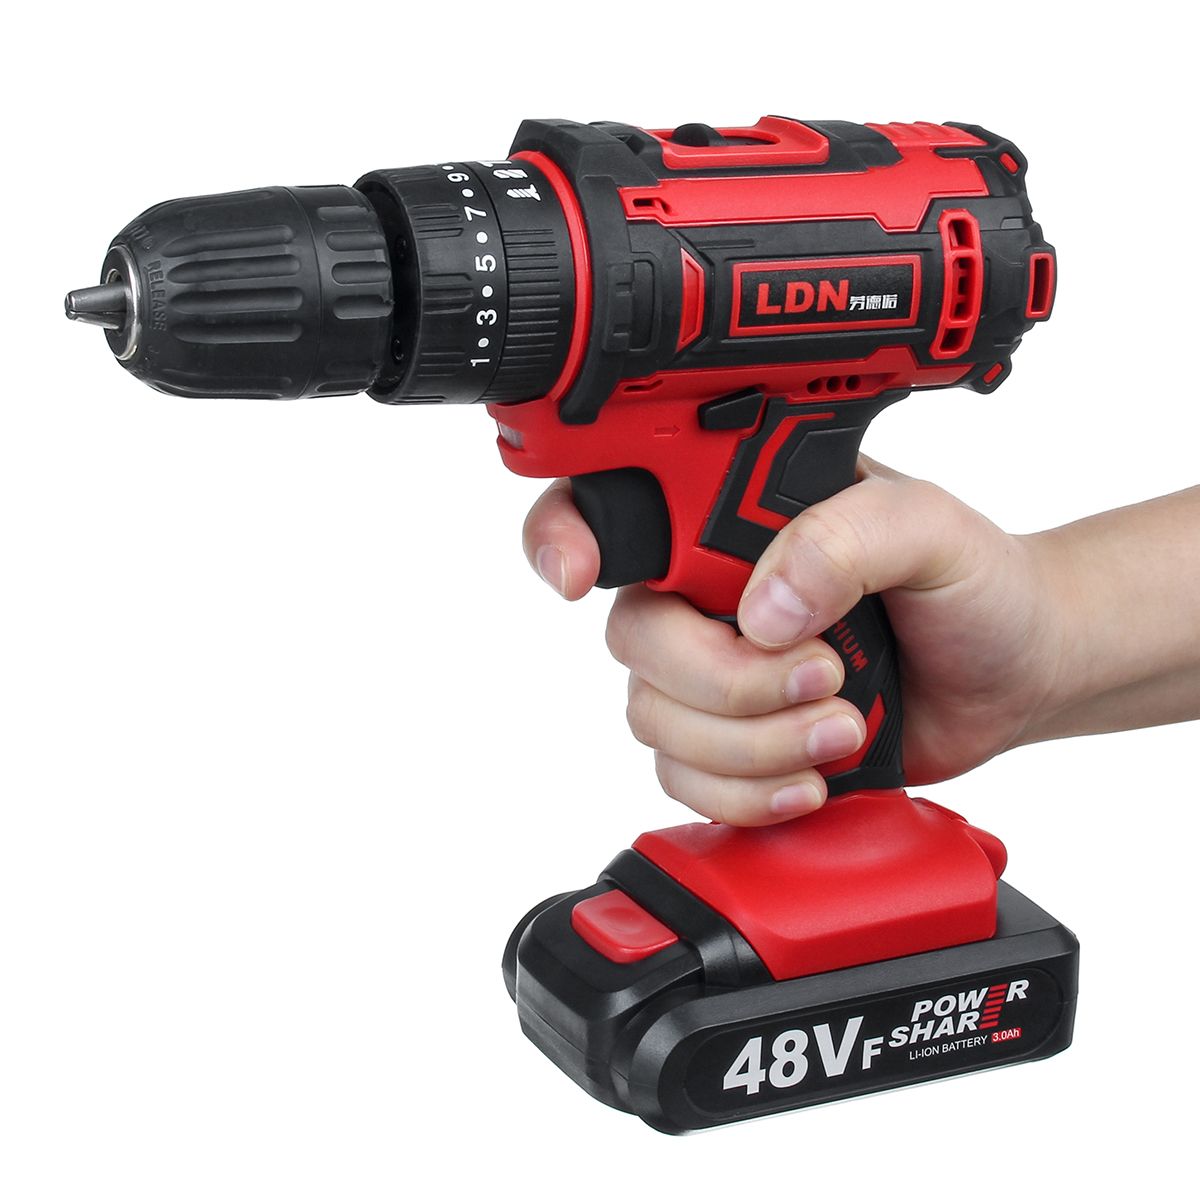 48VF-Cordless-Electric-Impact-Drill-Rechargeable-Drill-Screwdriver-W-1-or-2-Li-ion-Battery-1700826